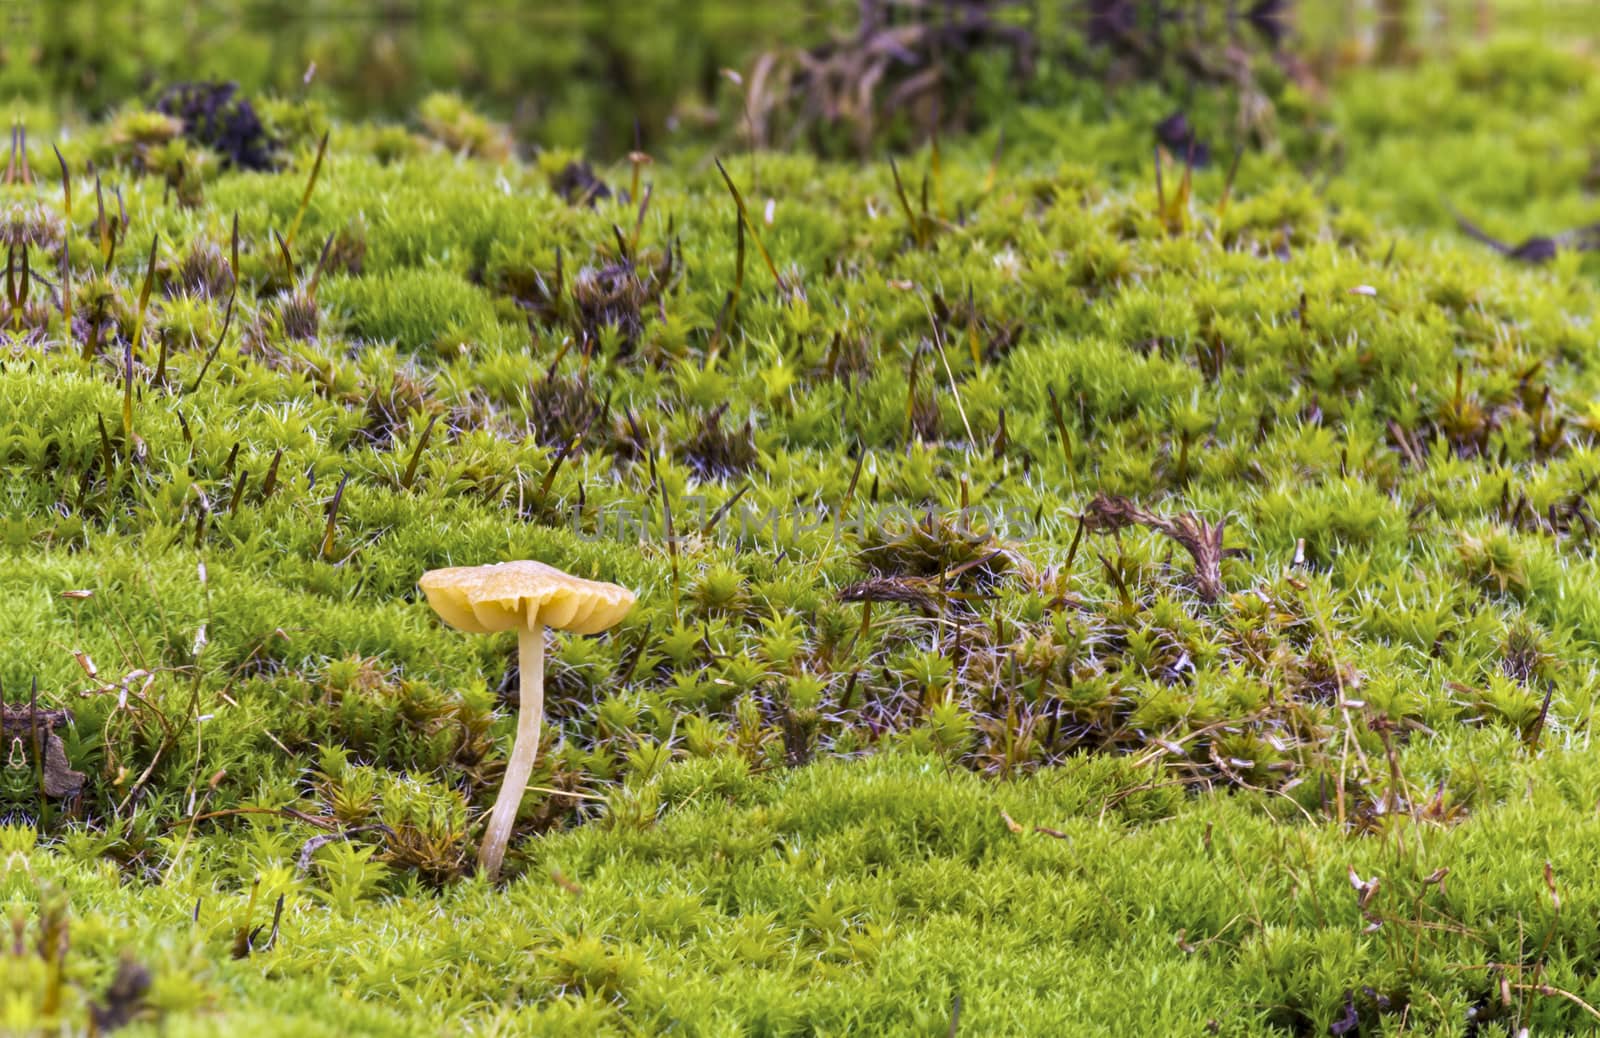 Mushrooms at the mossy forest floor